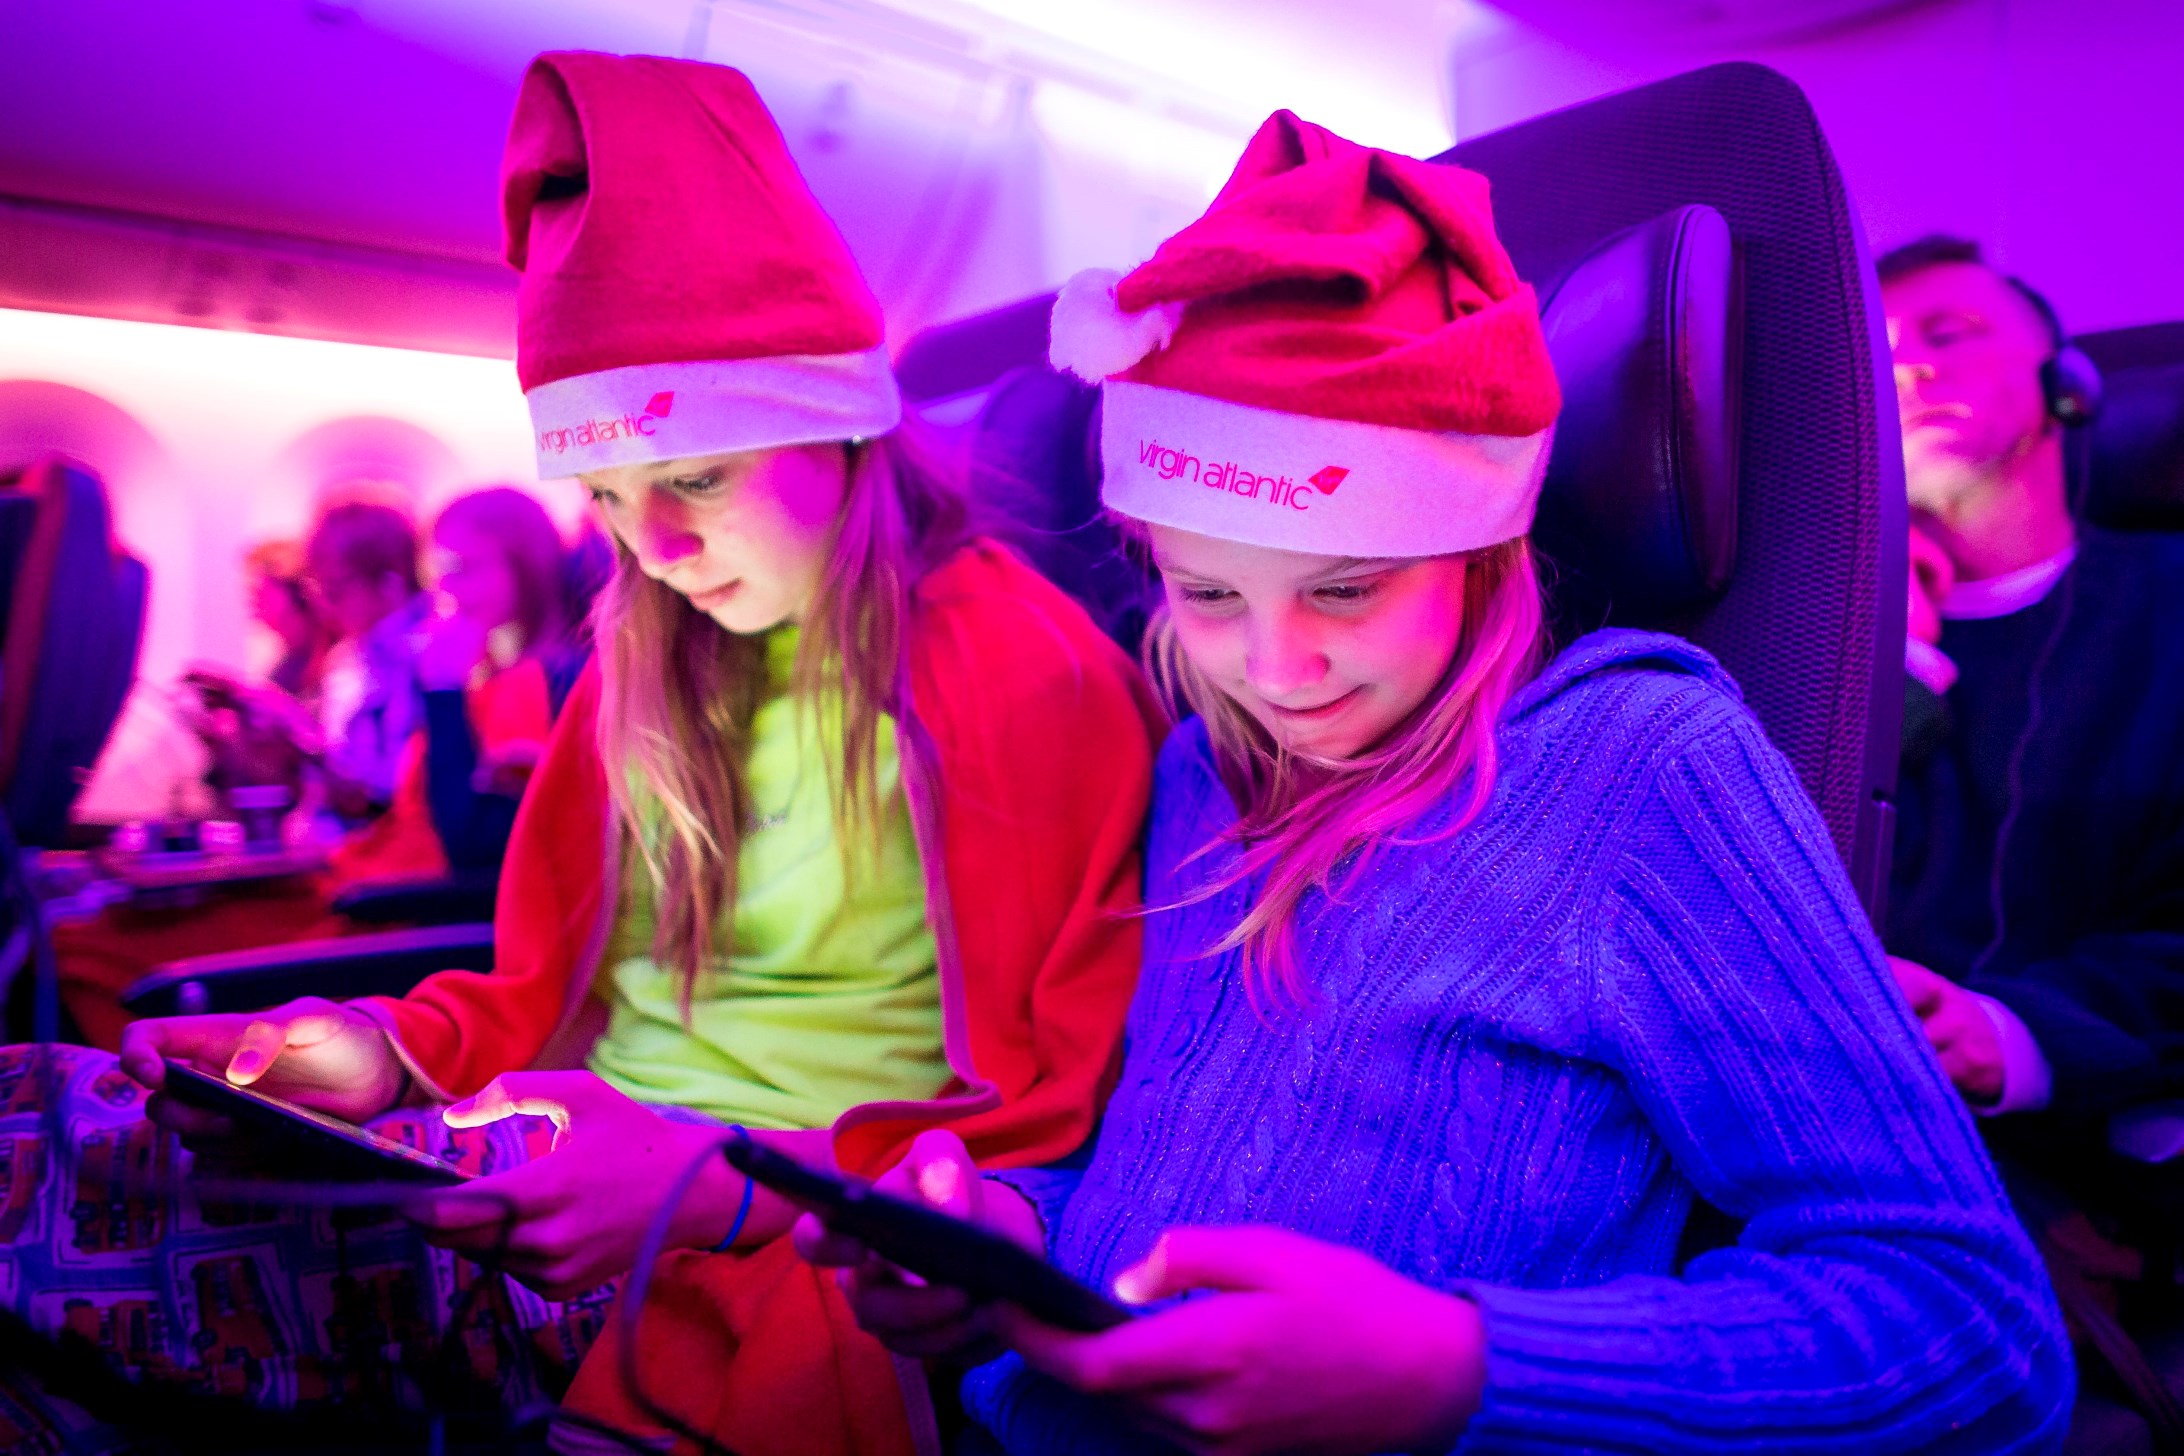 The tablets played an important role in tracking the journey of Father Christmas